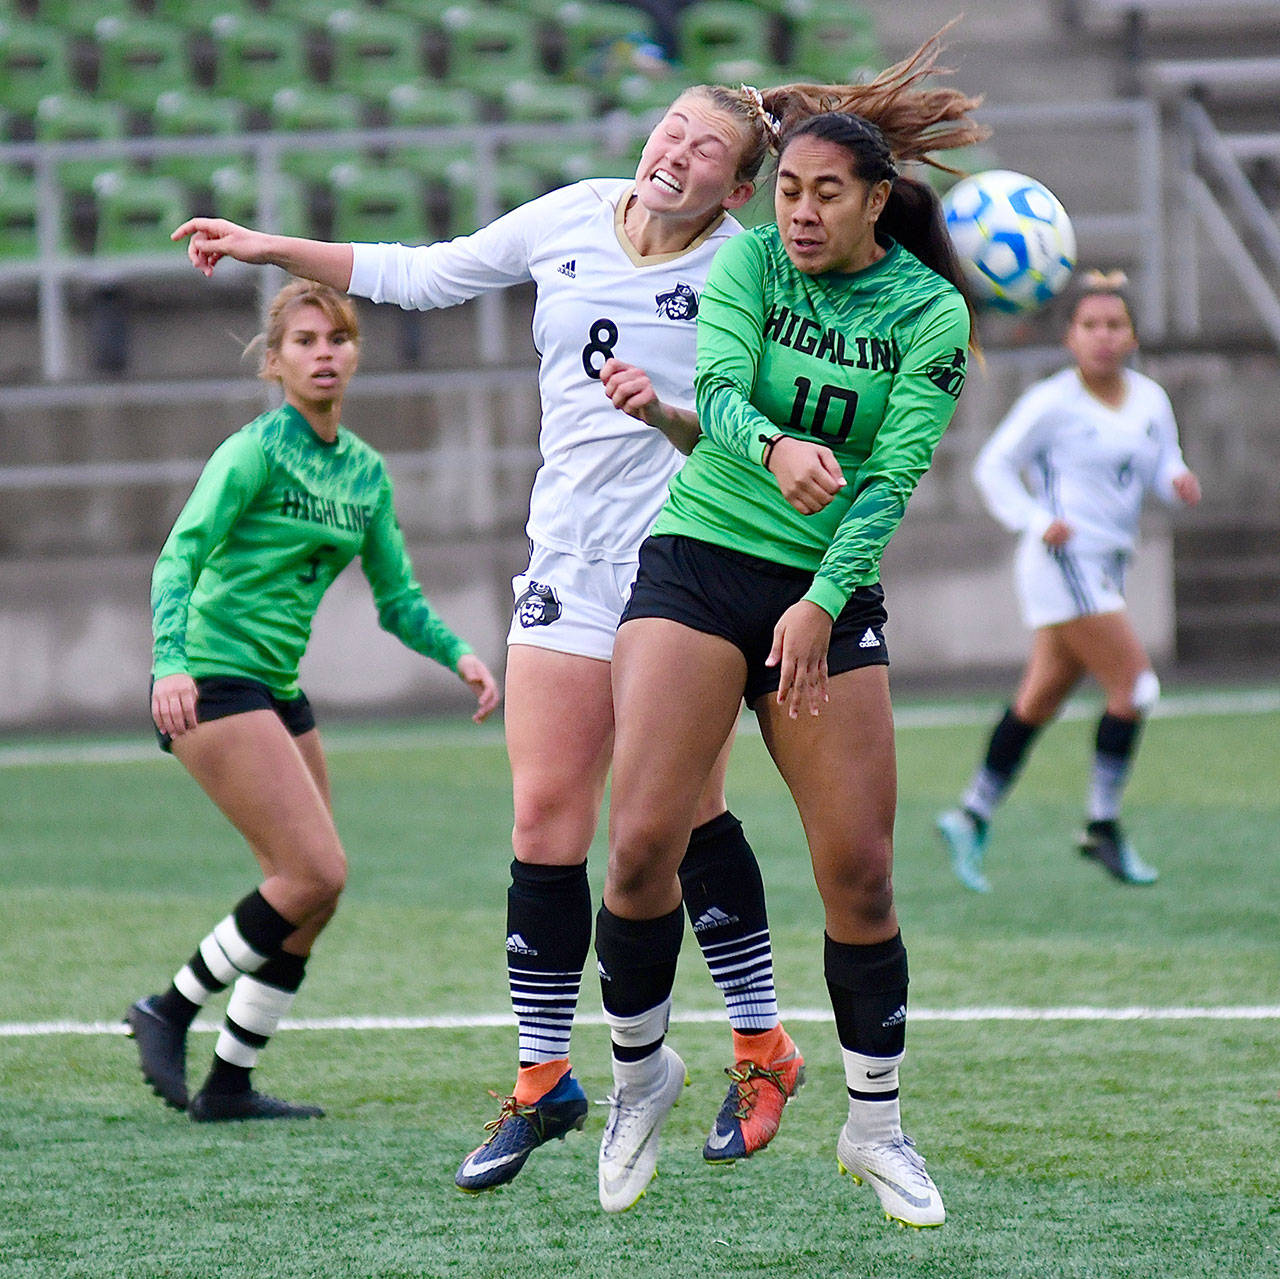 Peninsula’s Emilee Greve, left, goes up for a header with Highline’s kacy-Lyn Navarro in Friday’s NWAC semifinal in Tukwila. Peninsula won 1-0 and is playing the championship match today. (Jay Cline/for Peninsula Daily News)